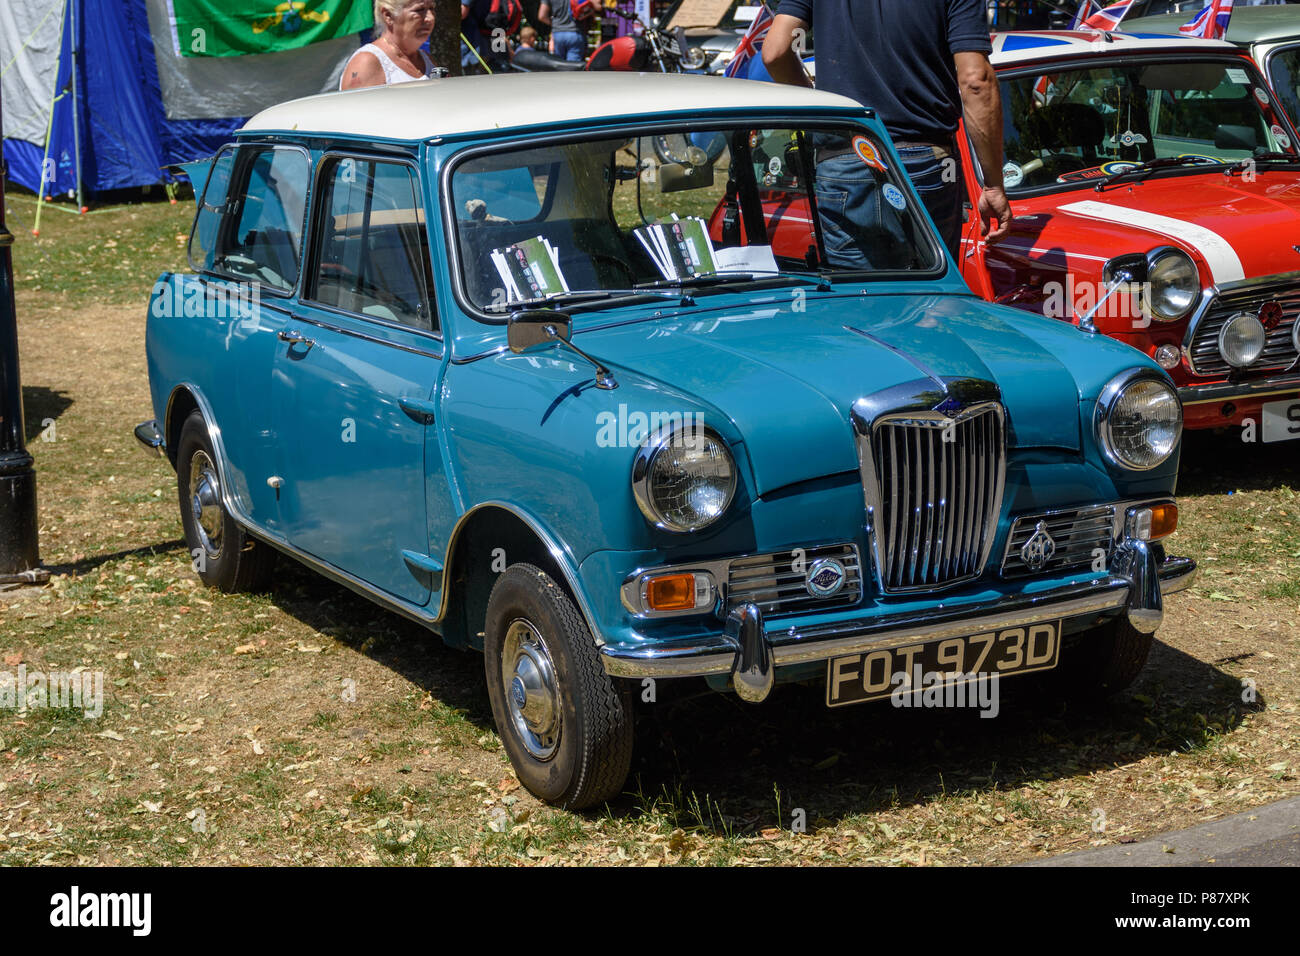 Turquoise blue Riley Elf on display at the armed forces celebration weekend in Trowbridge park Wiltshire Stock Photo